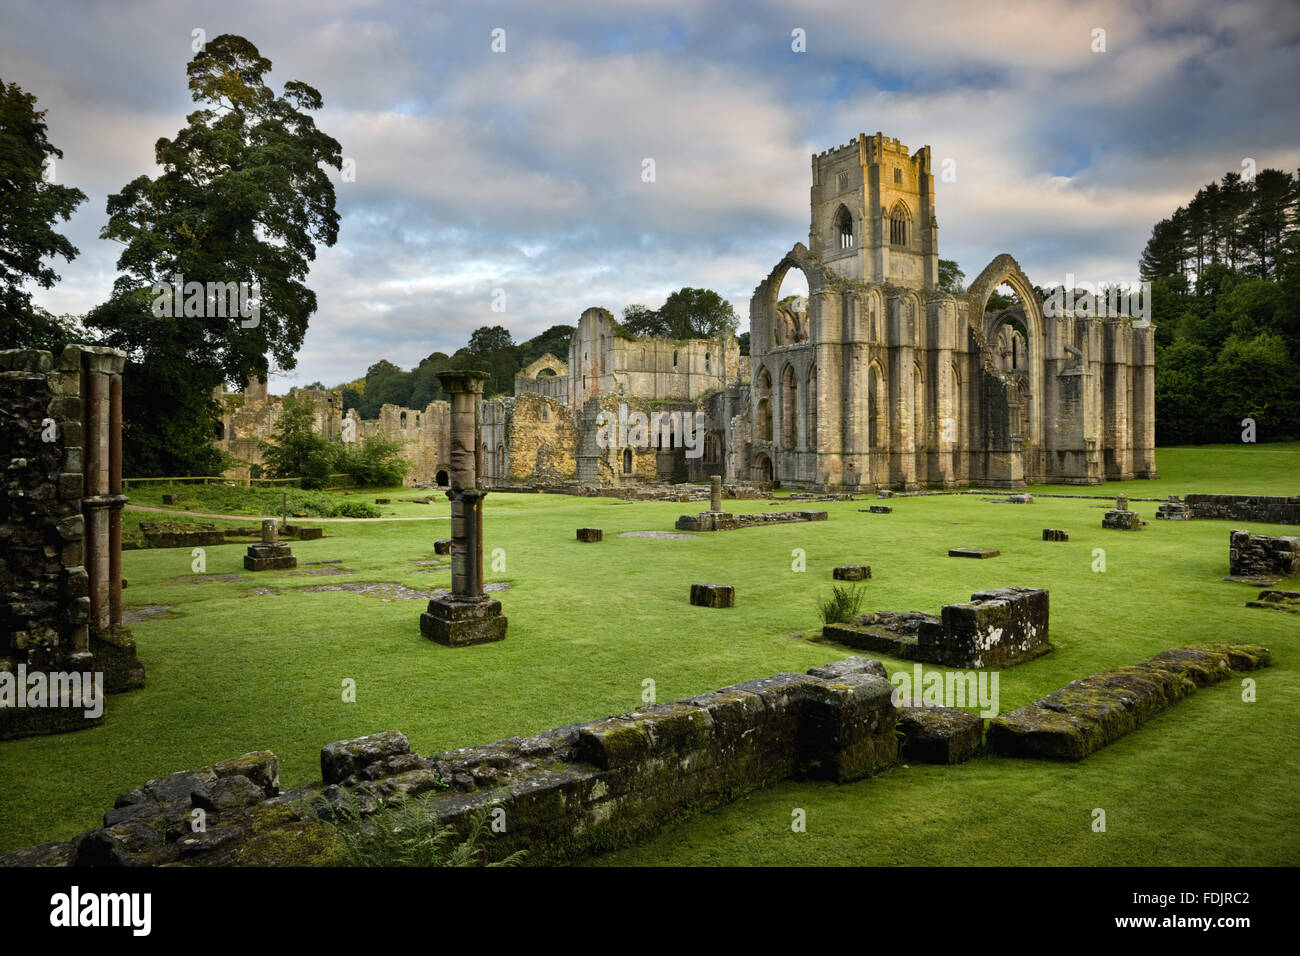 A view towards the east end of the Abbey church showing the great east window arch at Fountains Abbey, North Yorkshire. Remains of the monks' infirmary are visible in the foreground. The Cistercian community of monks was founded here in 1132 but was disso Stock Photo